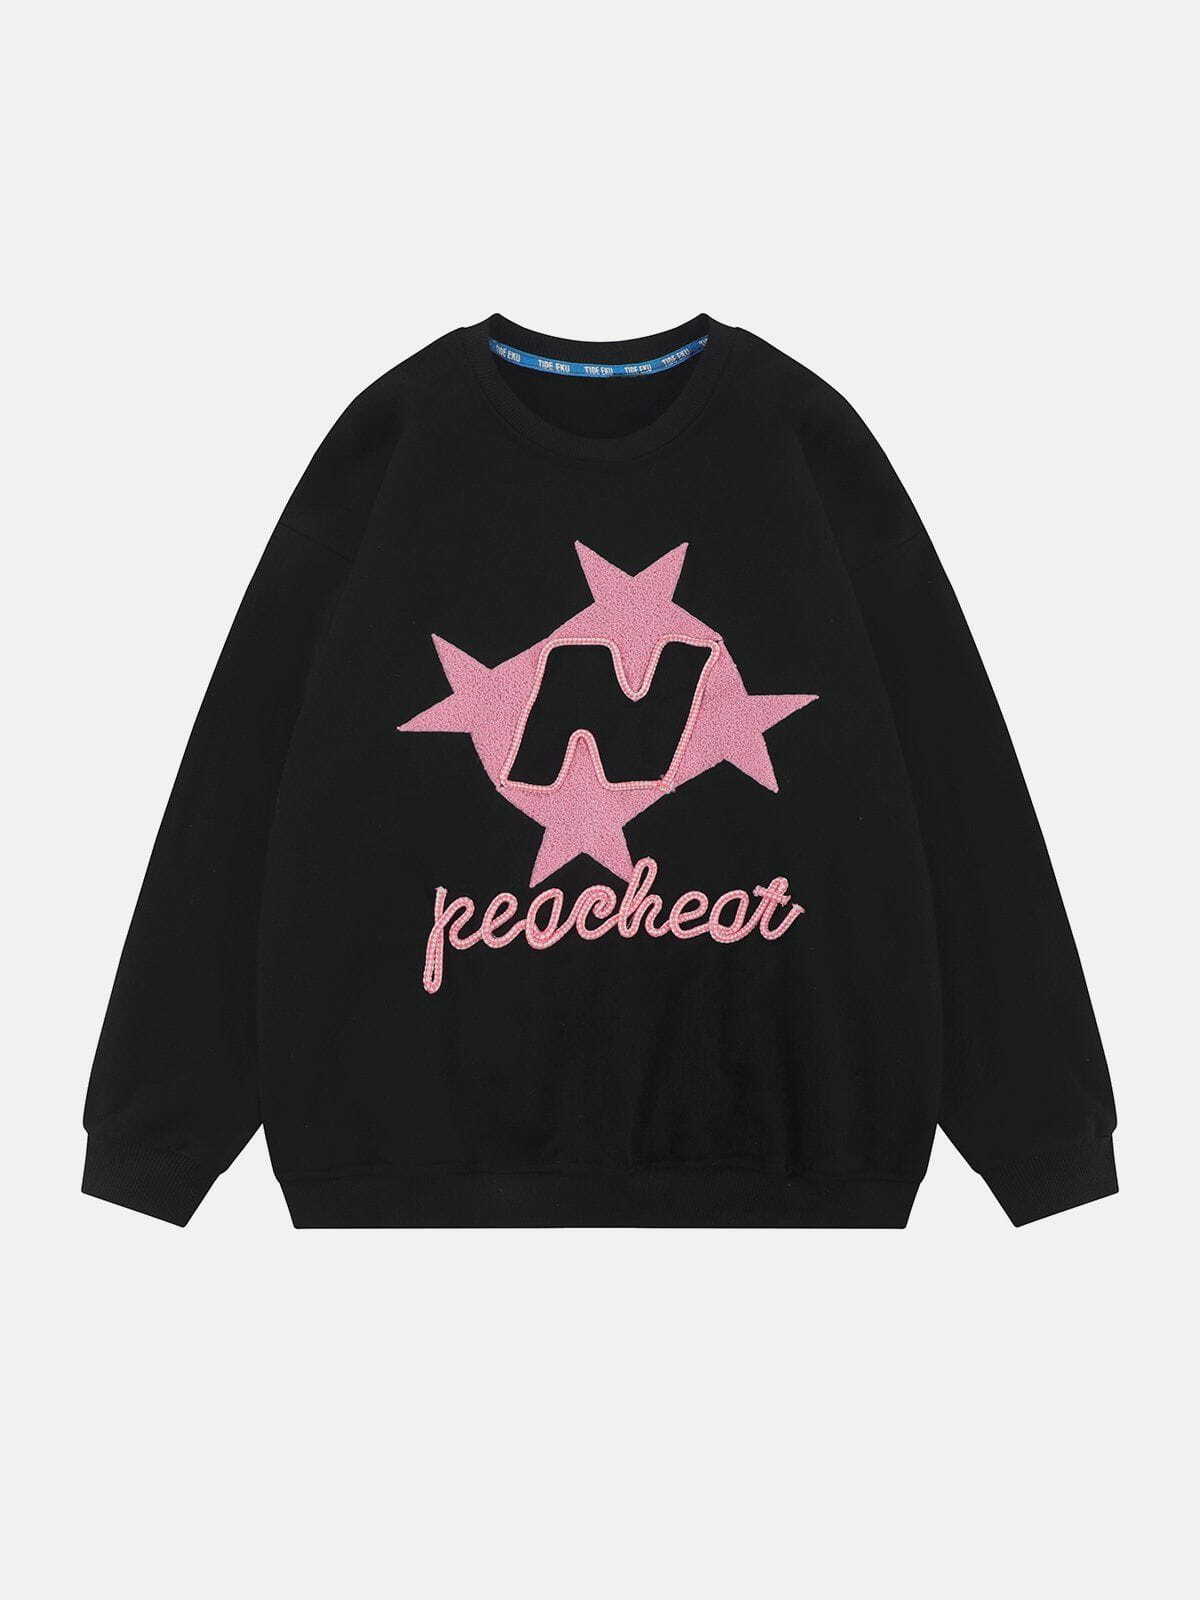 embroidered star sweatshirt quirky & y2k chic 1014